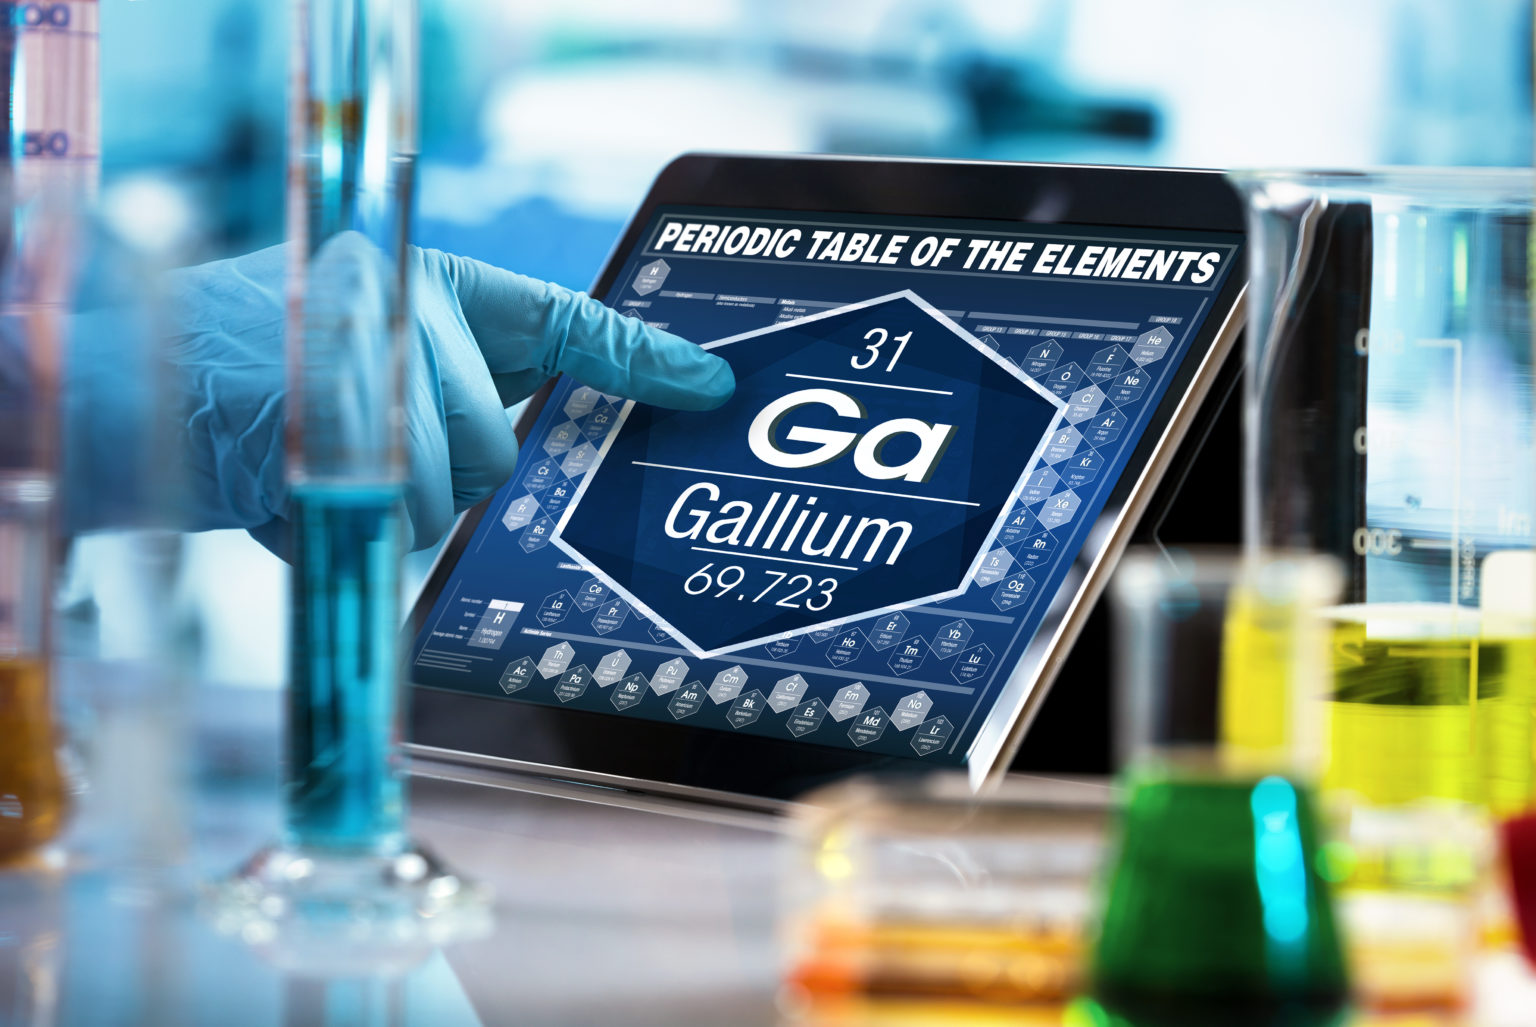 Gallium price jumps as buyers lock in supply before China export controls